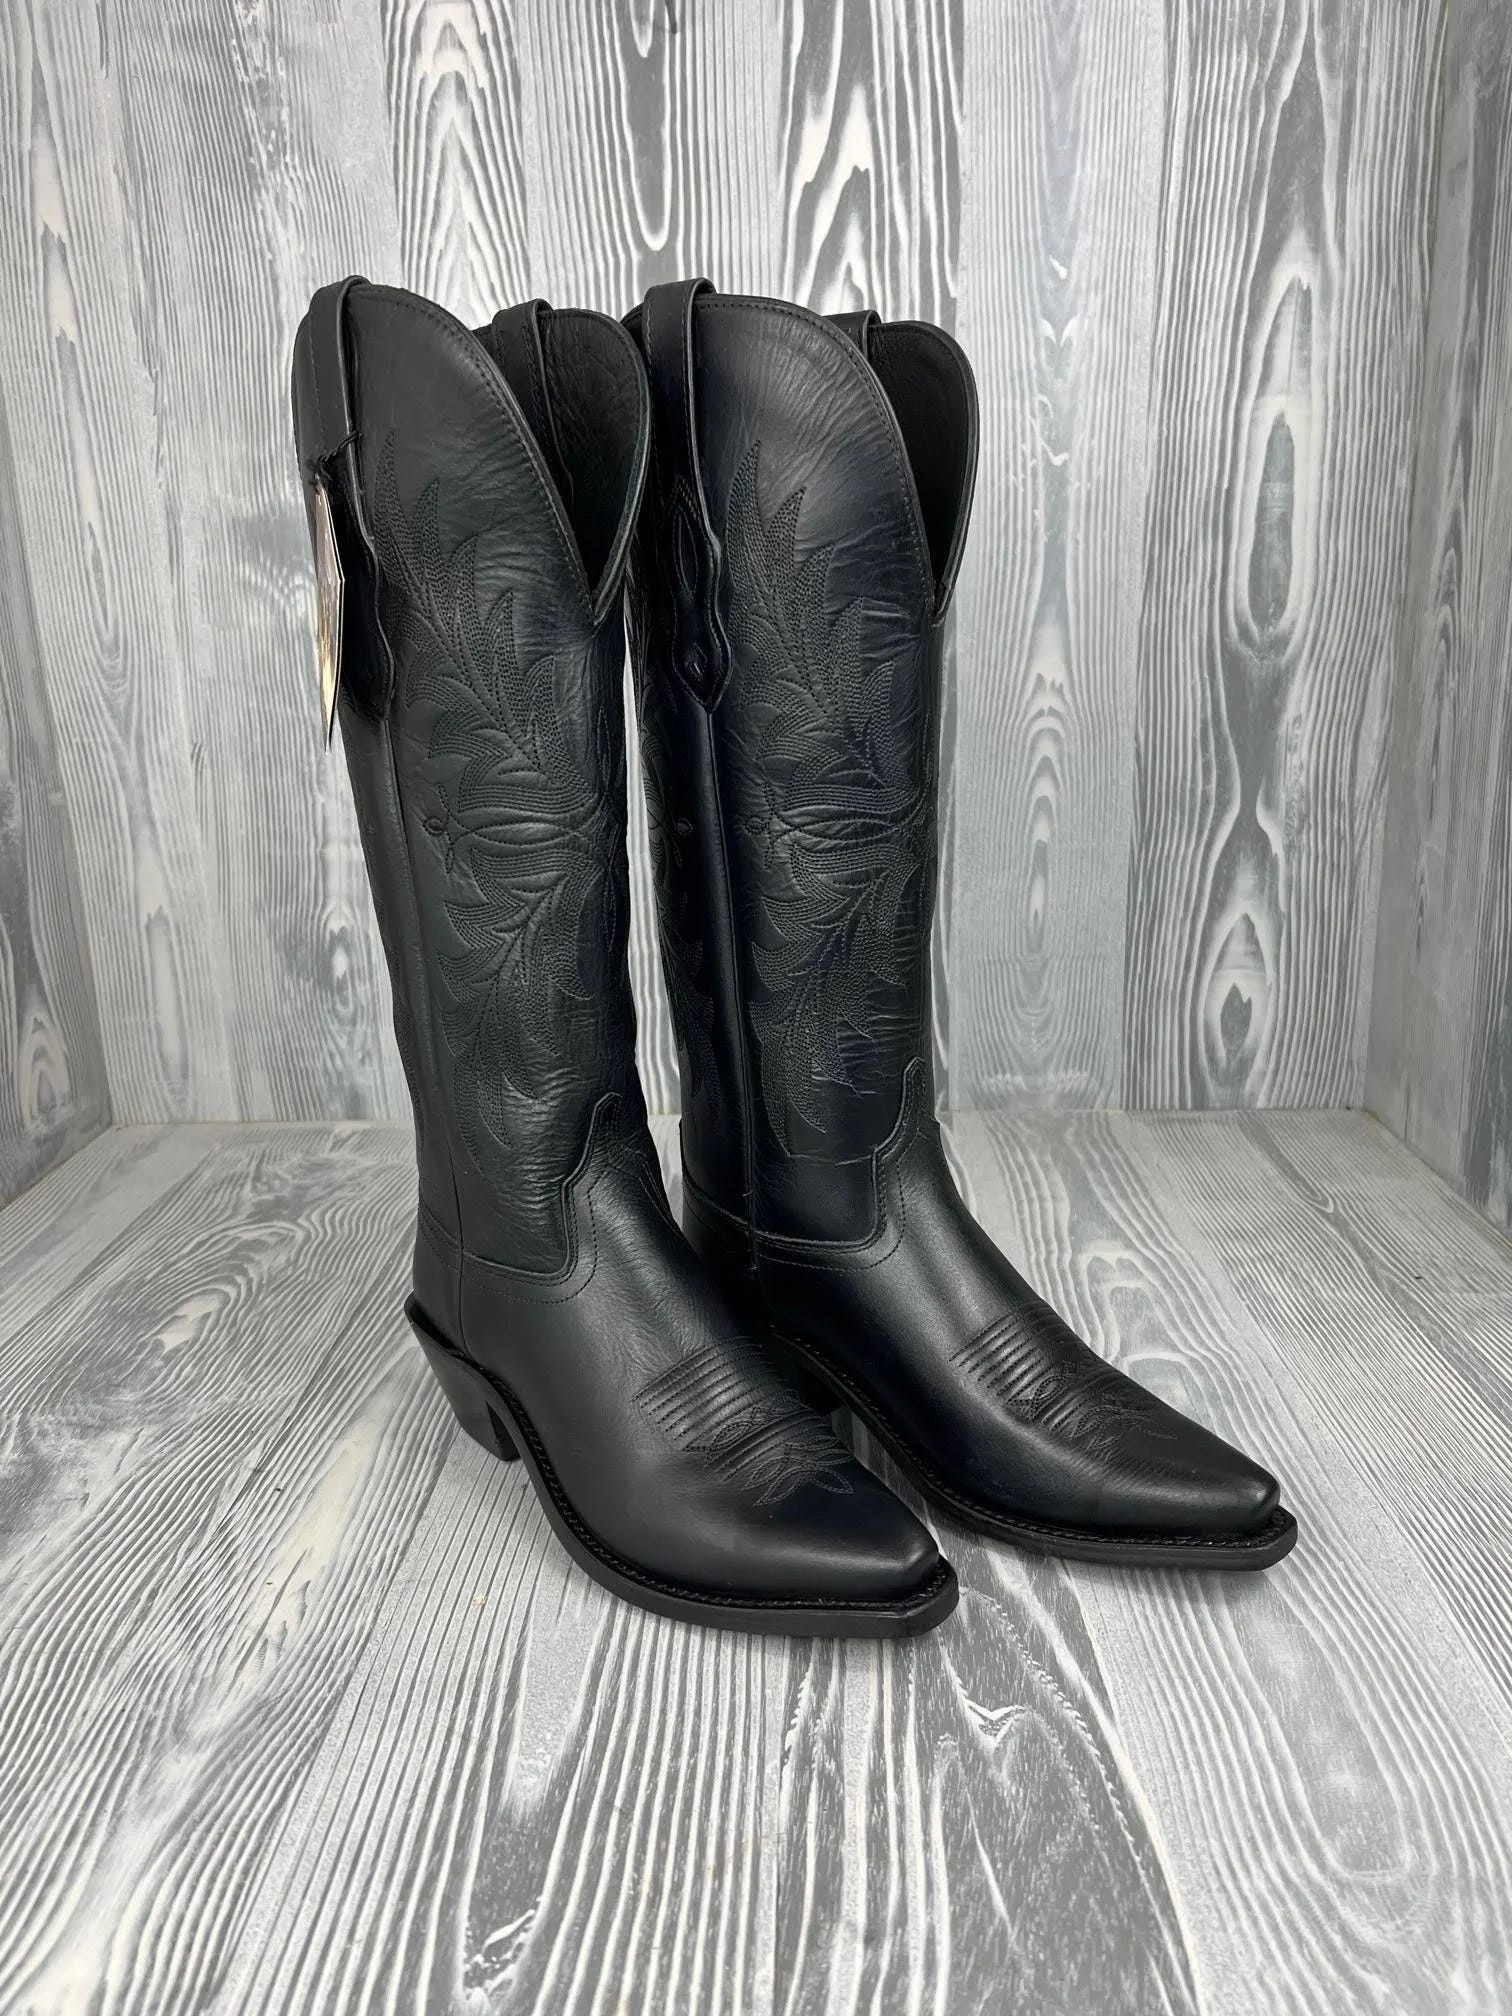 Authentic Leather Black Cowgirl Boots - Stylish and Comfortable | Image